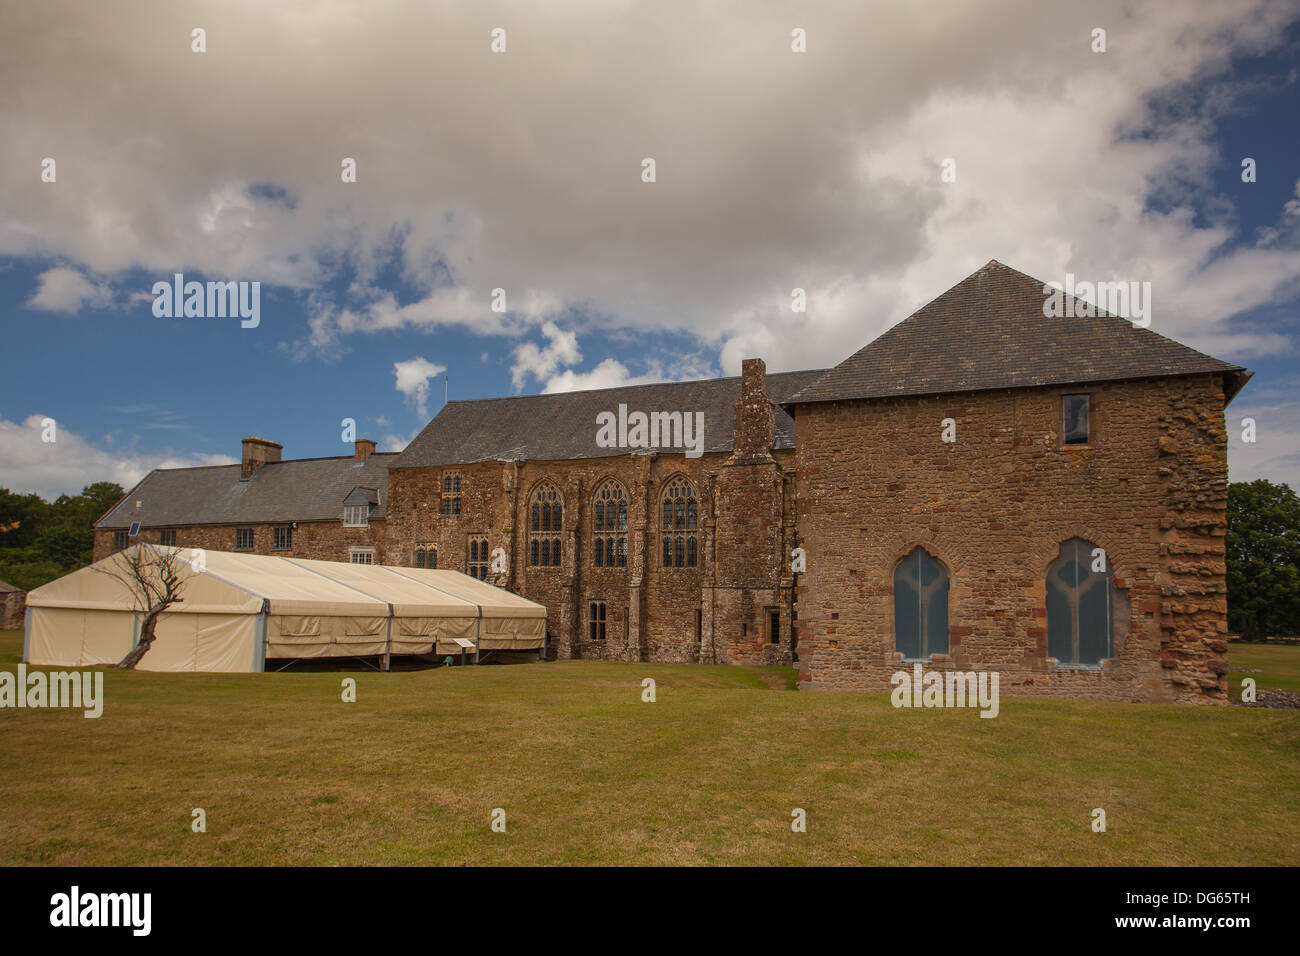 Renovated Cleve Abbey in Great Britain Stock Photo